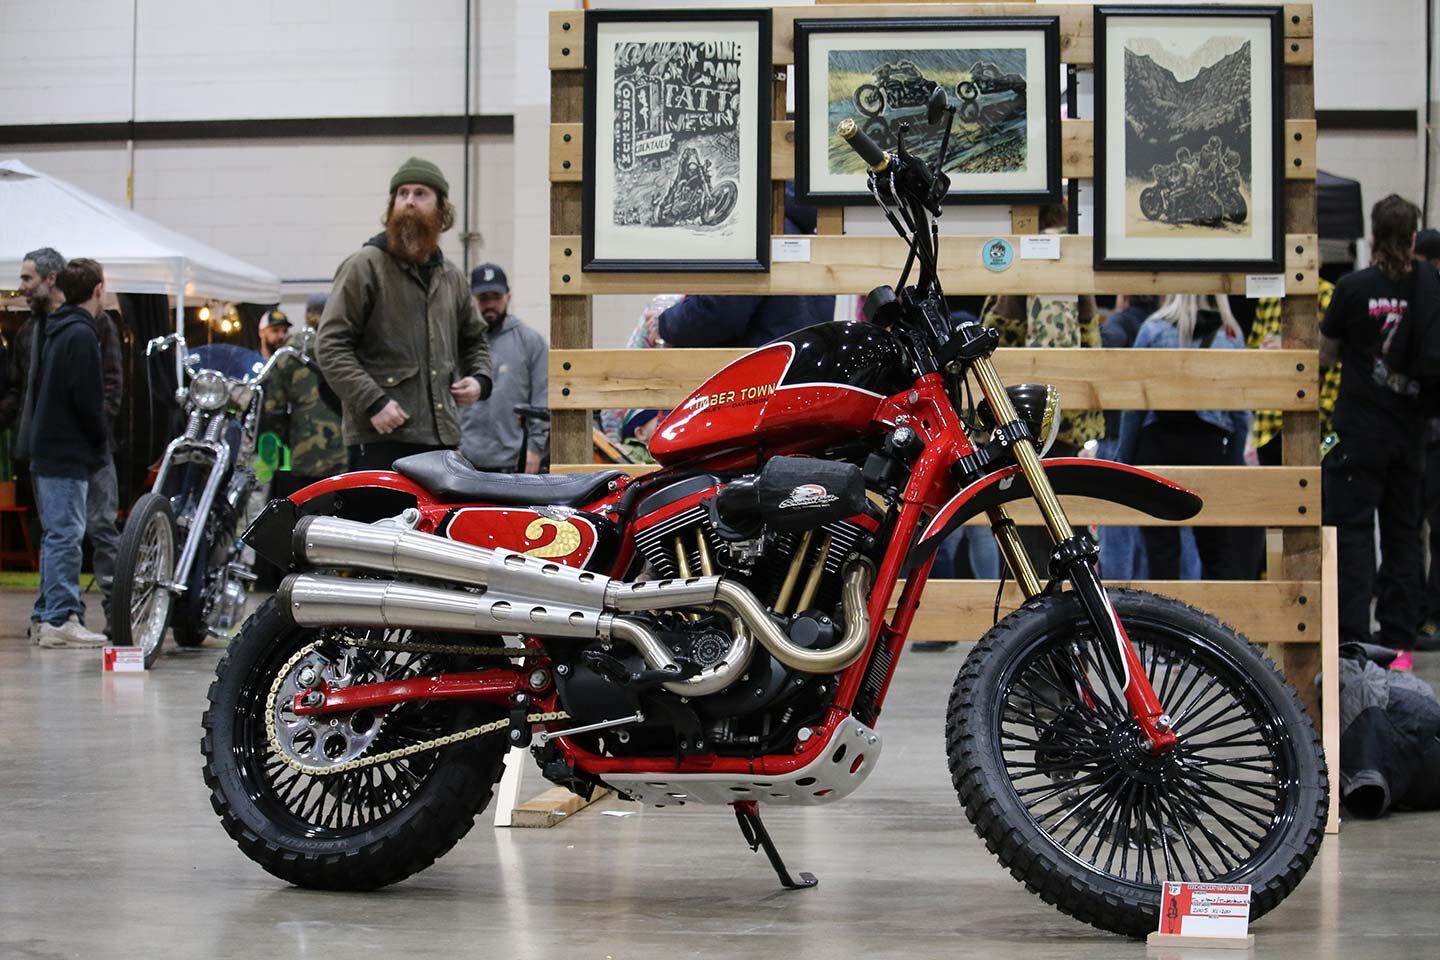 Timber Town Harley-Davidson, a big supporter of the show, turned this 2005 XL1200 into the perfect ripper for Oregon fire roads.